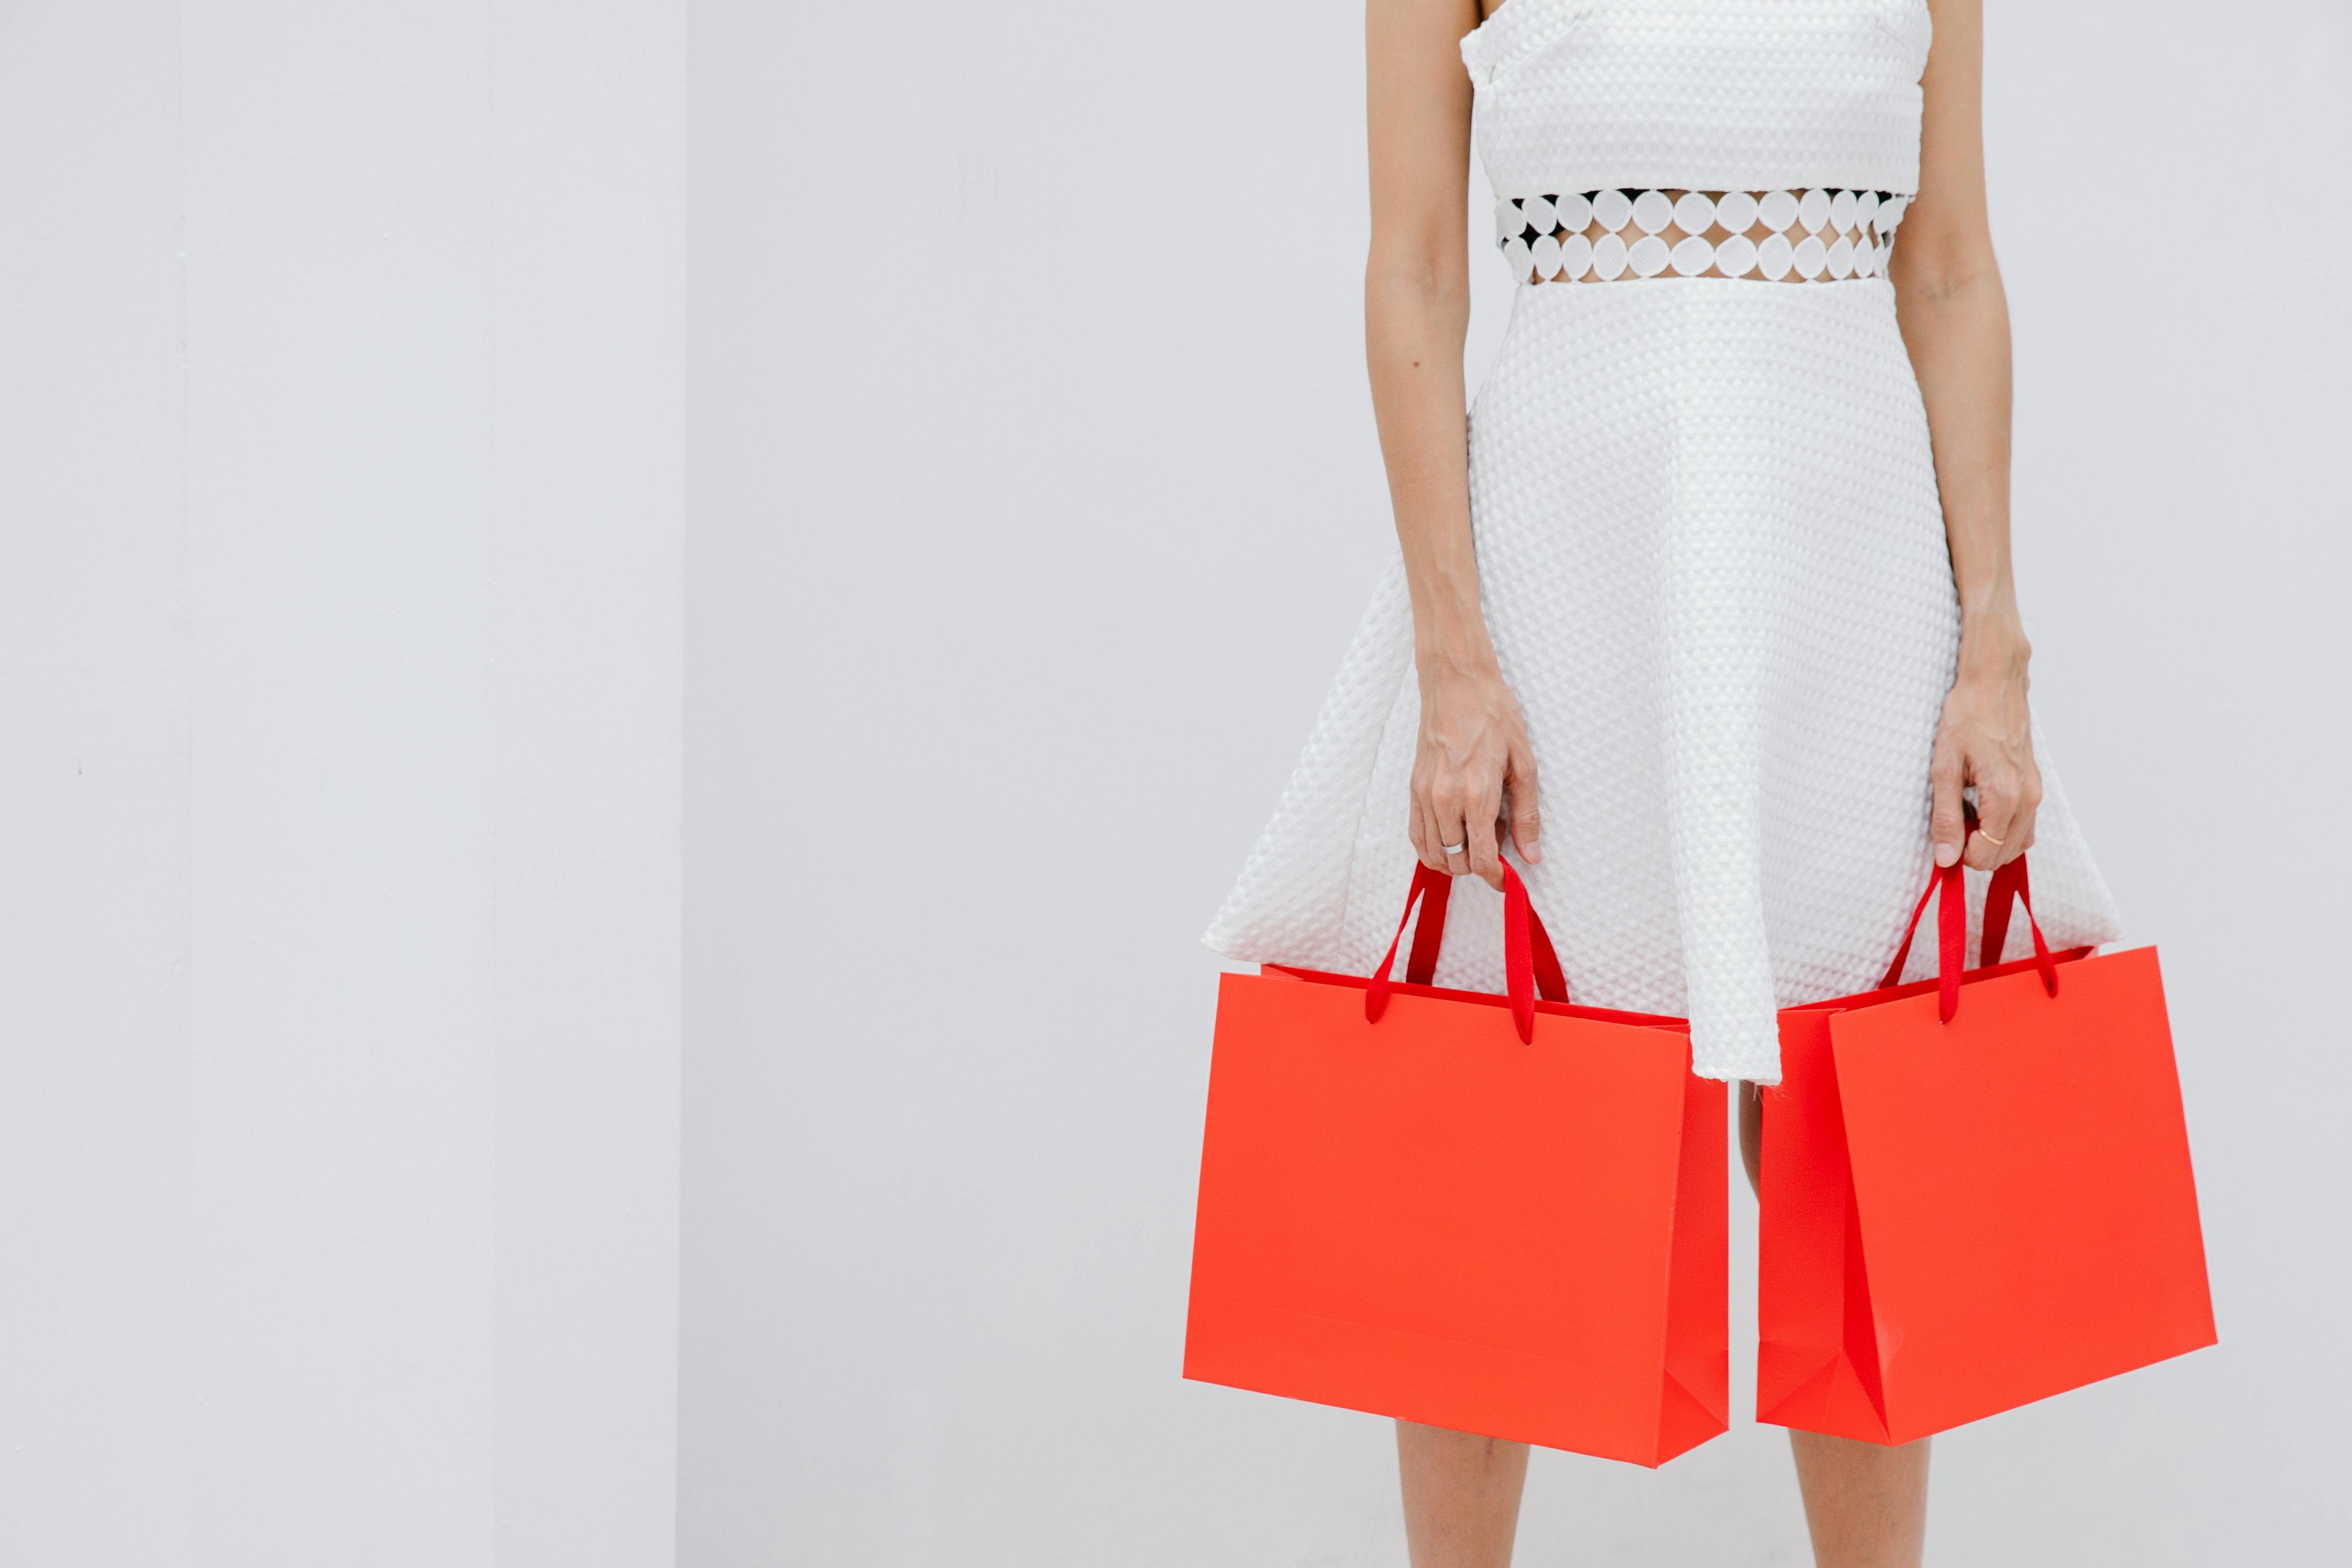 crop unrecognizable woman carrying red shopping bags in studio